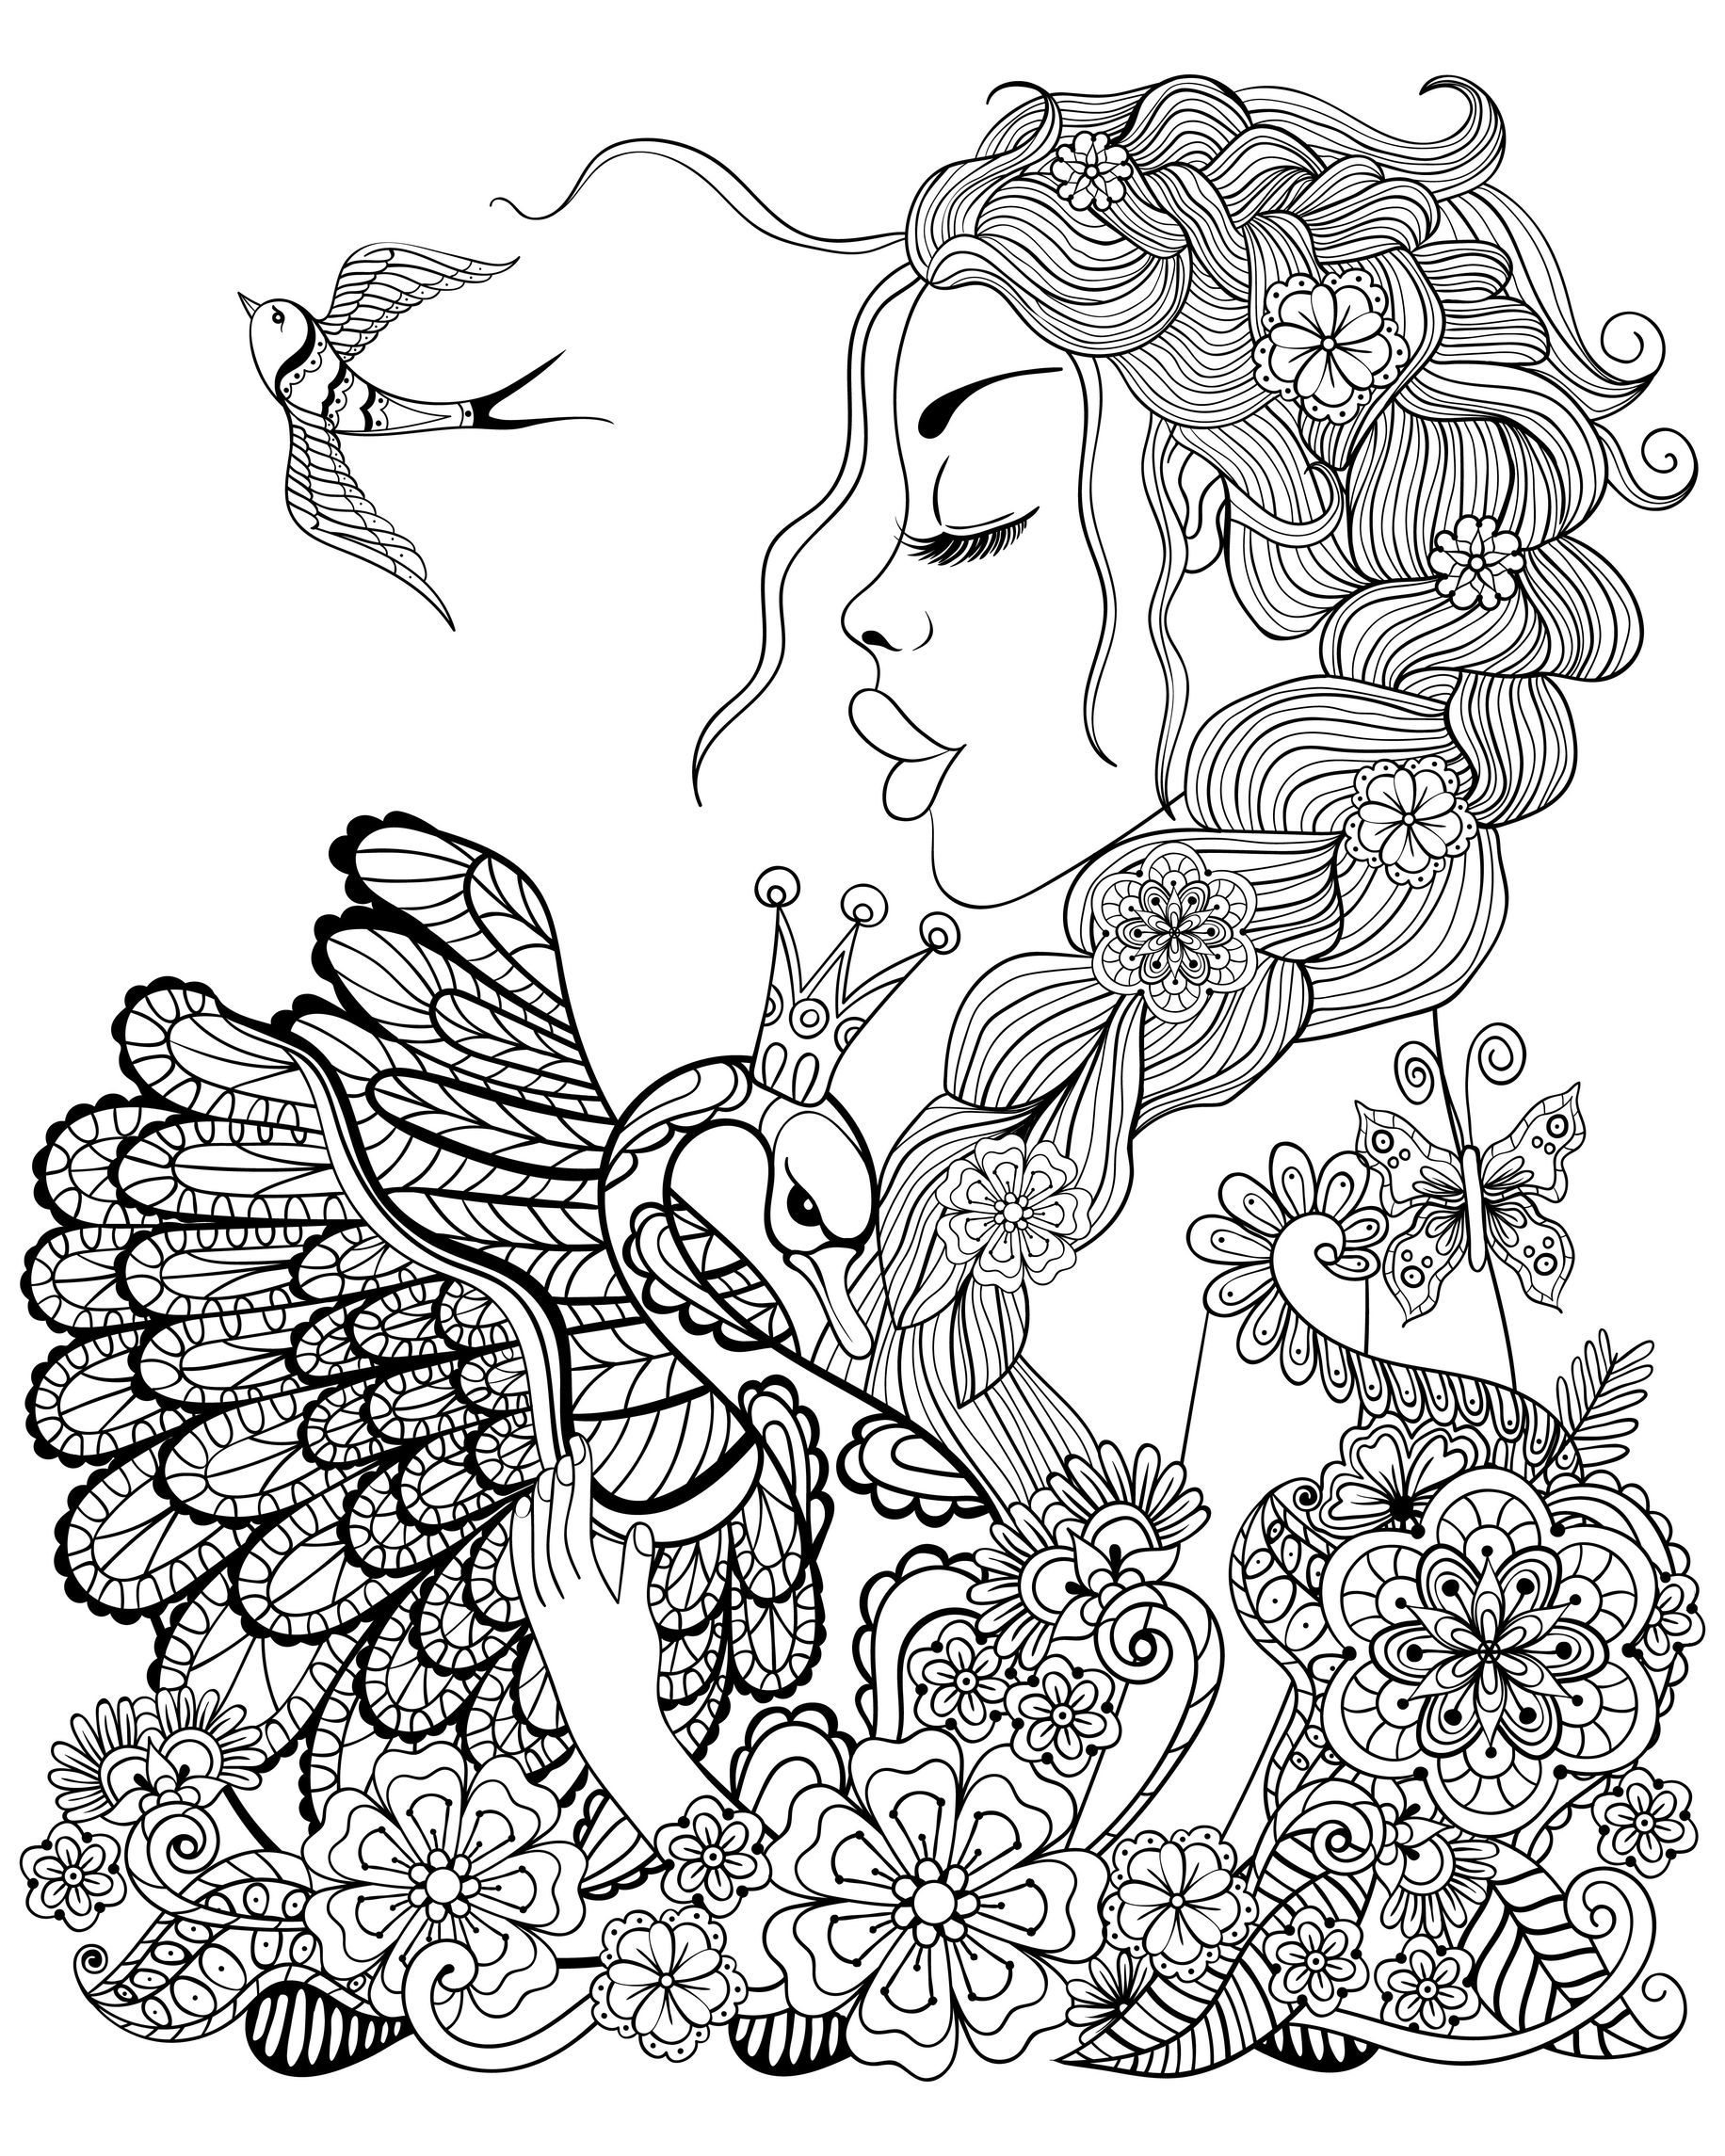  Anime Fairy Coloring Pages for Kindergarten